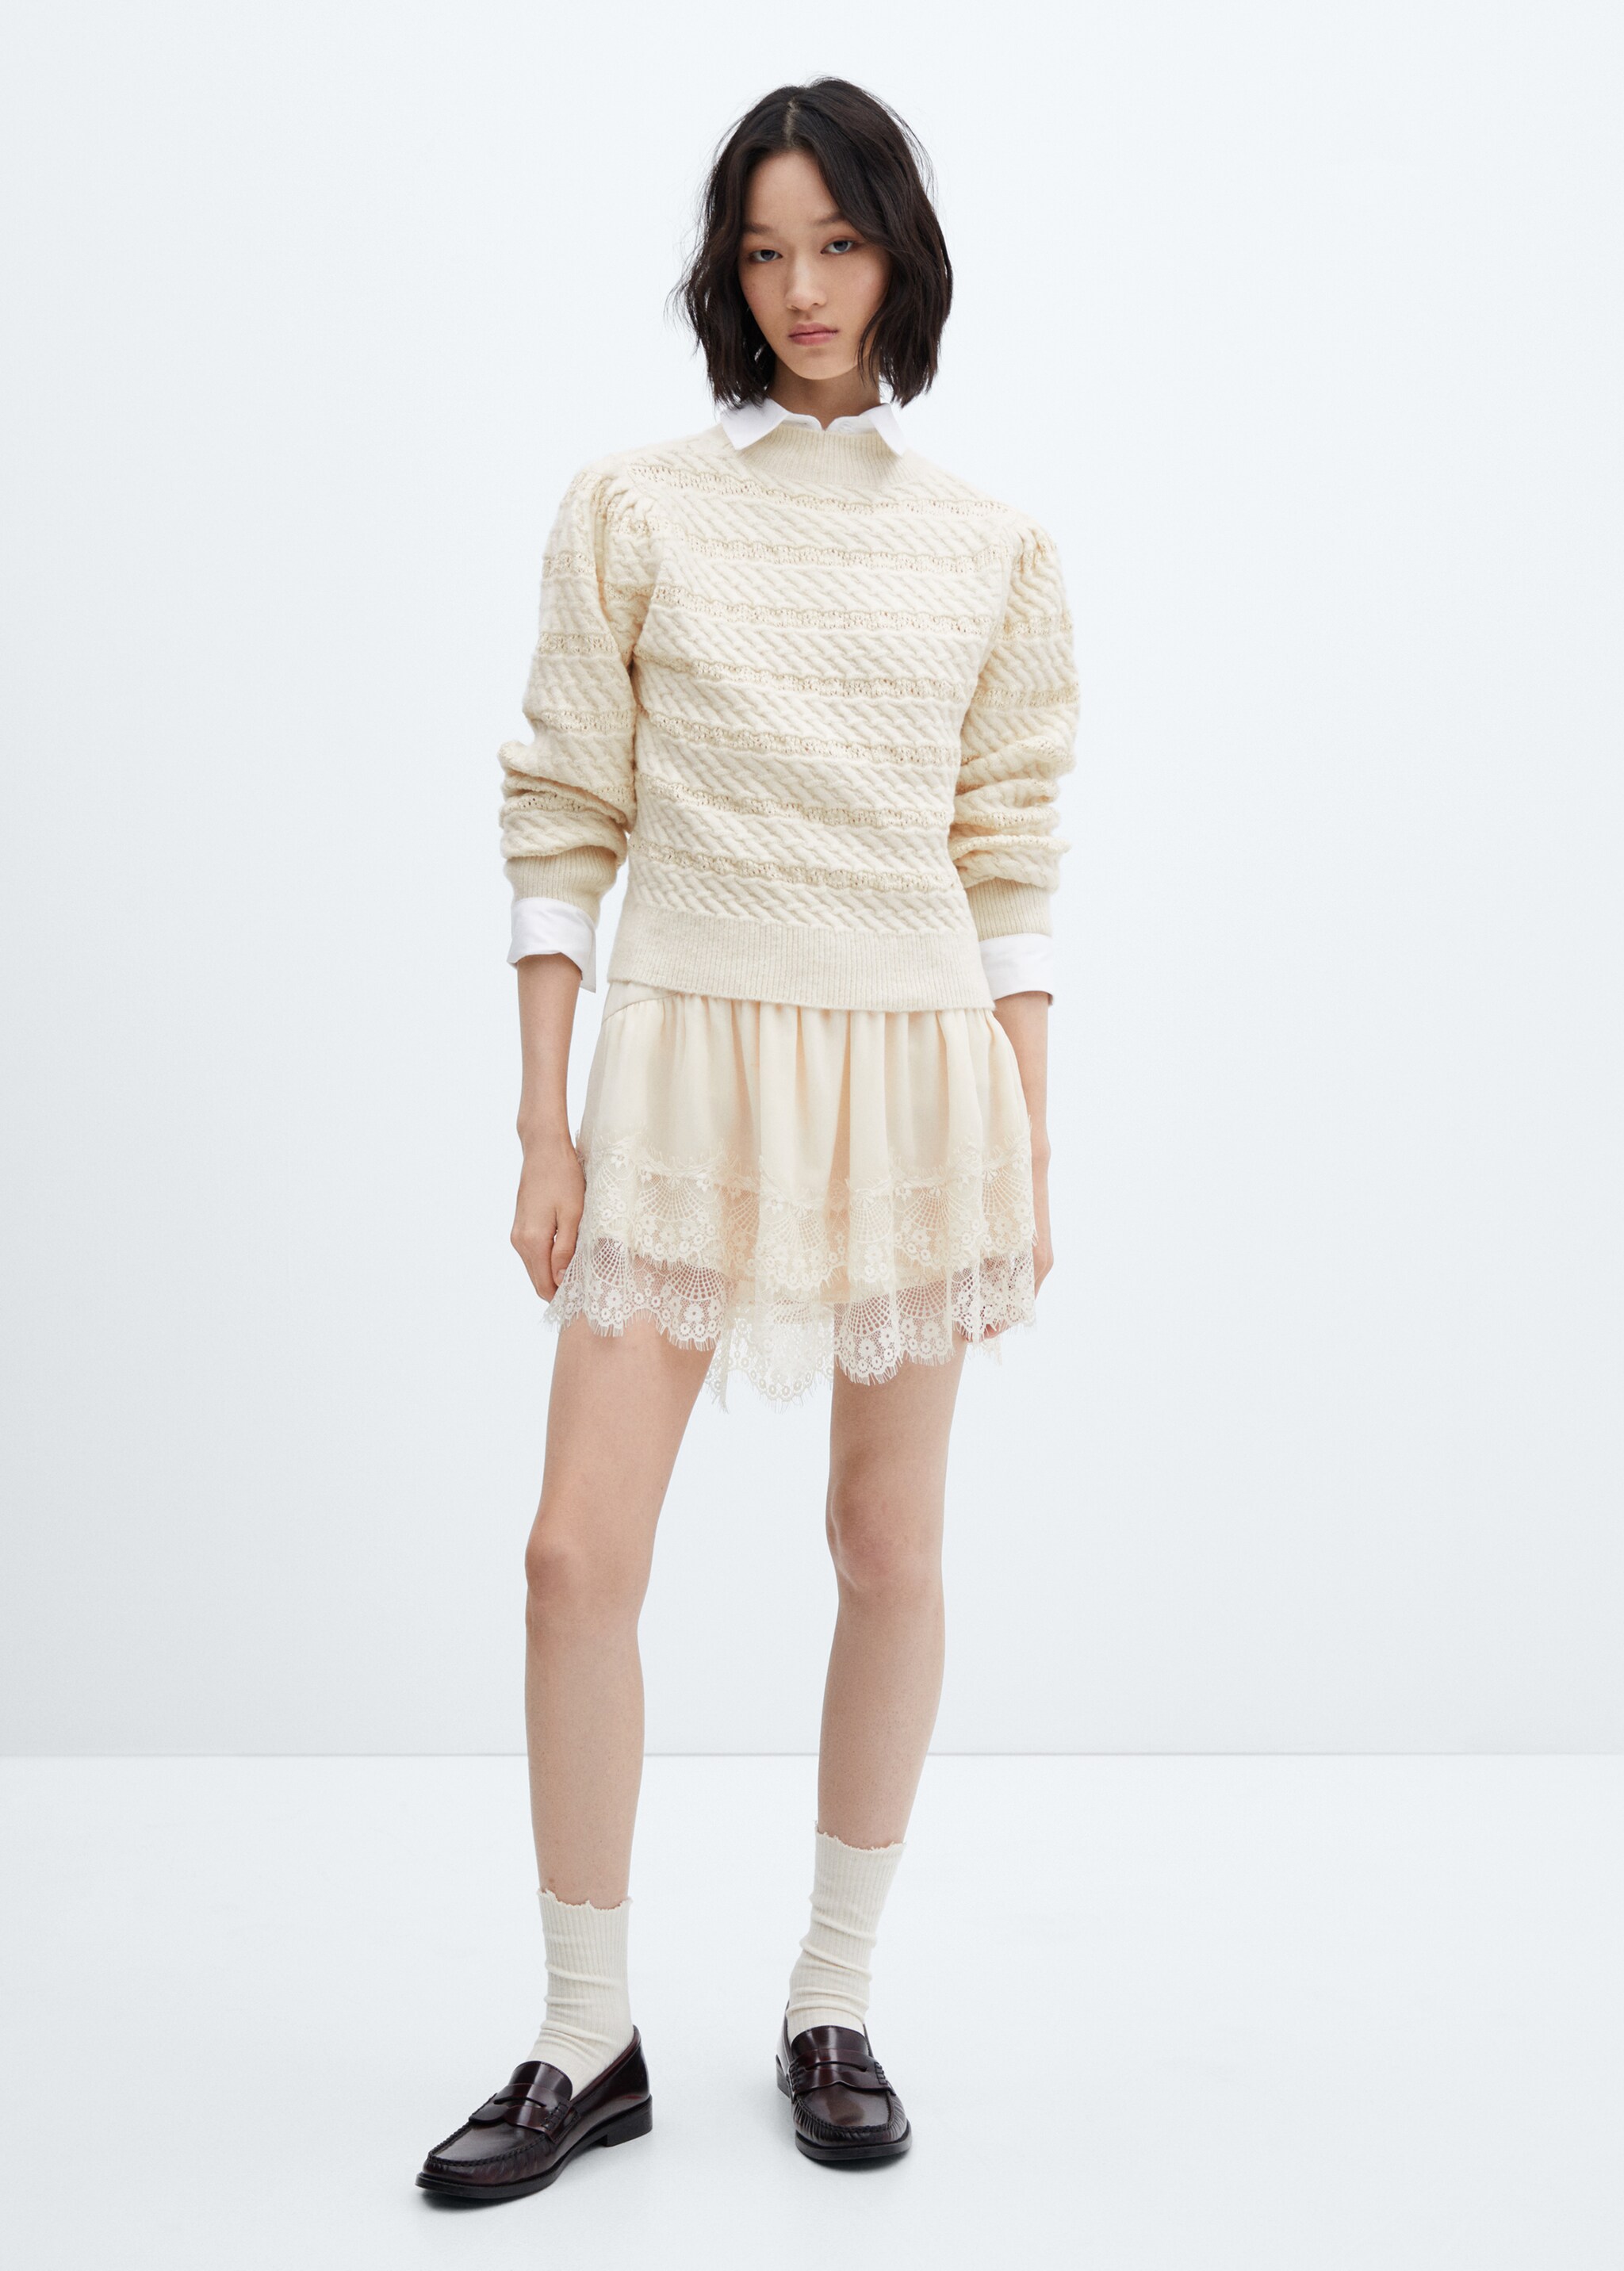 Knitted braided sweater - Plan general